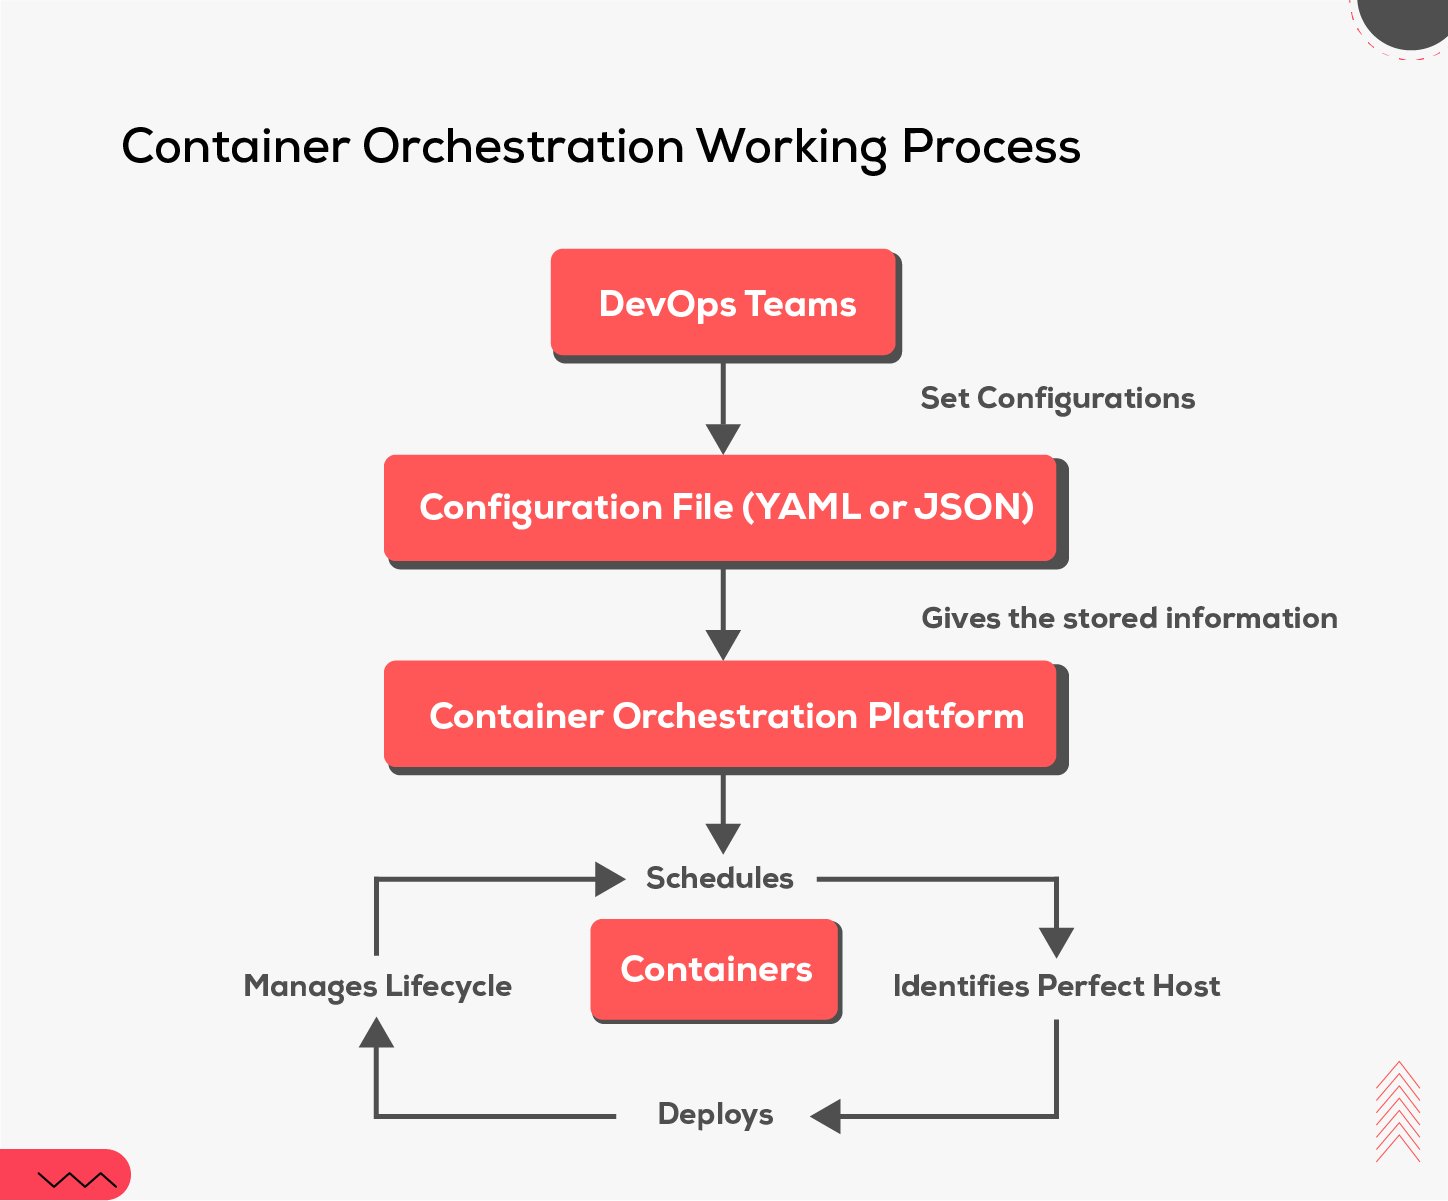 Container Orchestration Working Process